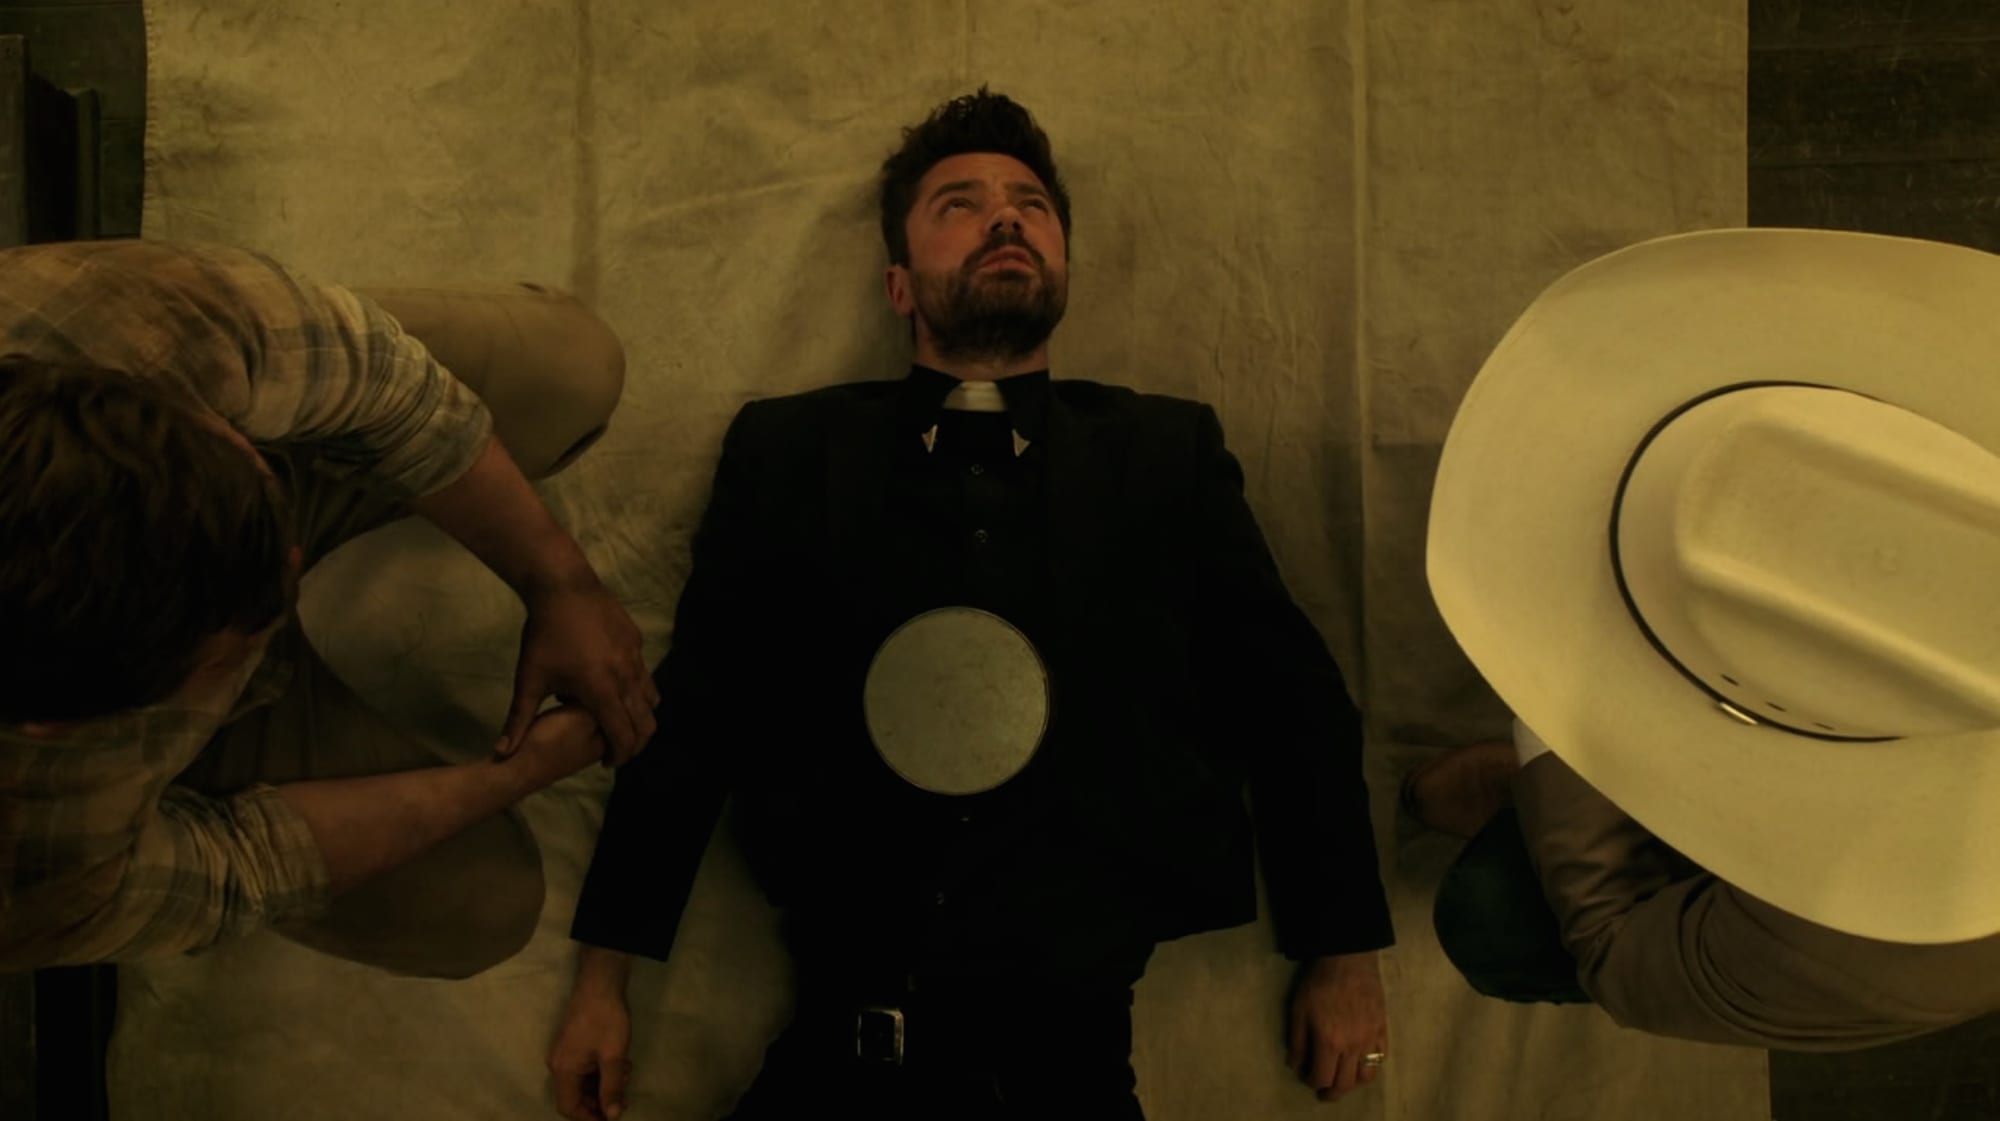 5-things-you-might-have-missed-from-season-1-episode-8-of-preacher-parting-ways-jess-1063066.jpg